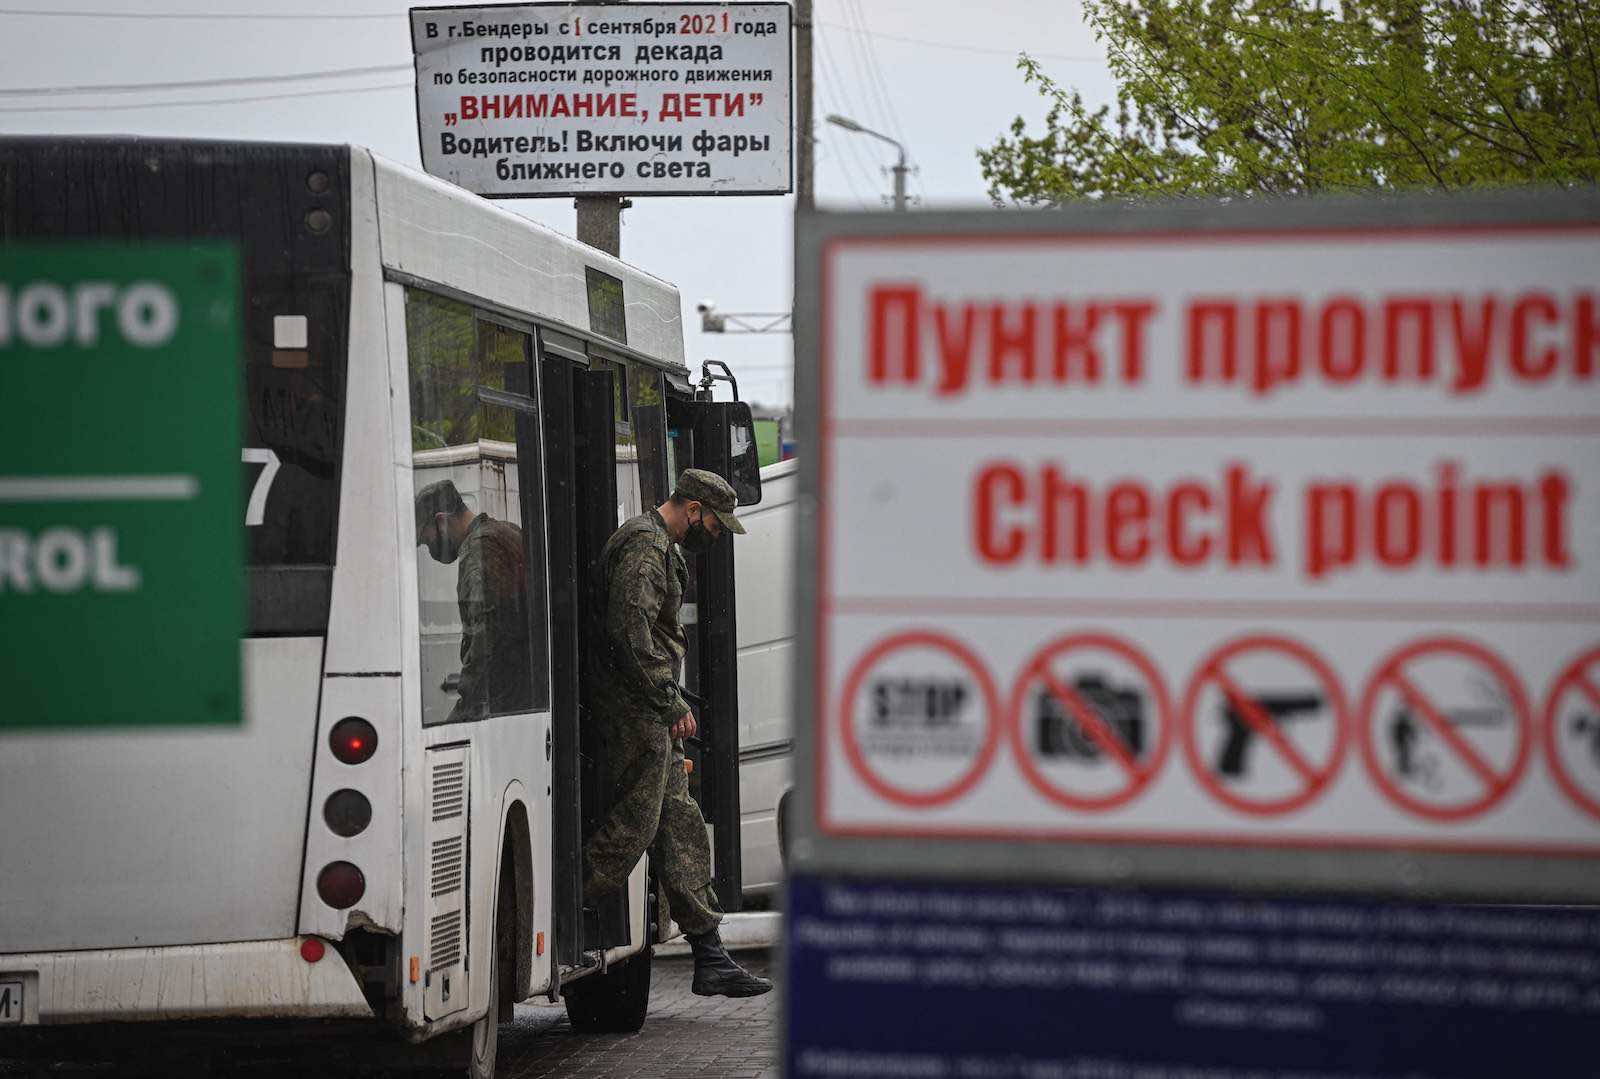 Checking passengers entering the self-proclaimed “Moldovan Republic of Transnistria” at Varnita border point with Moldova on 28 April (Daniel Mihailescu/AFP via Getty Images)